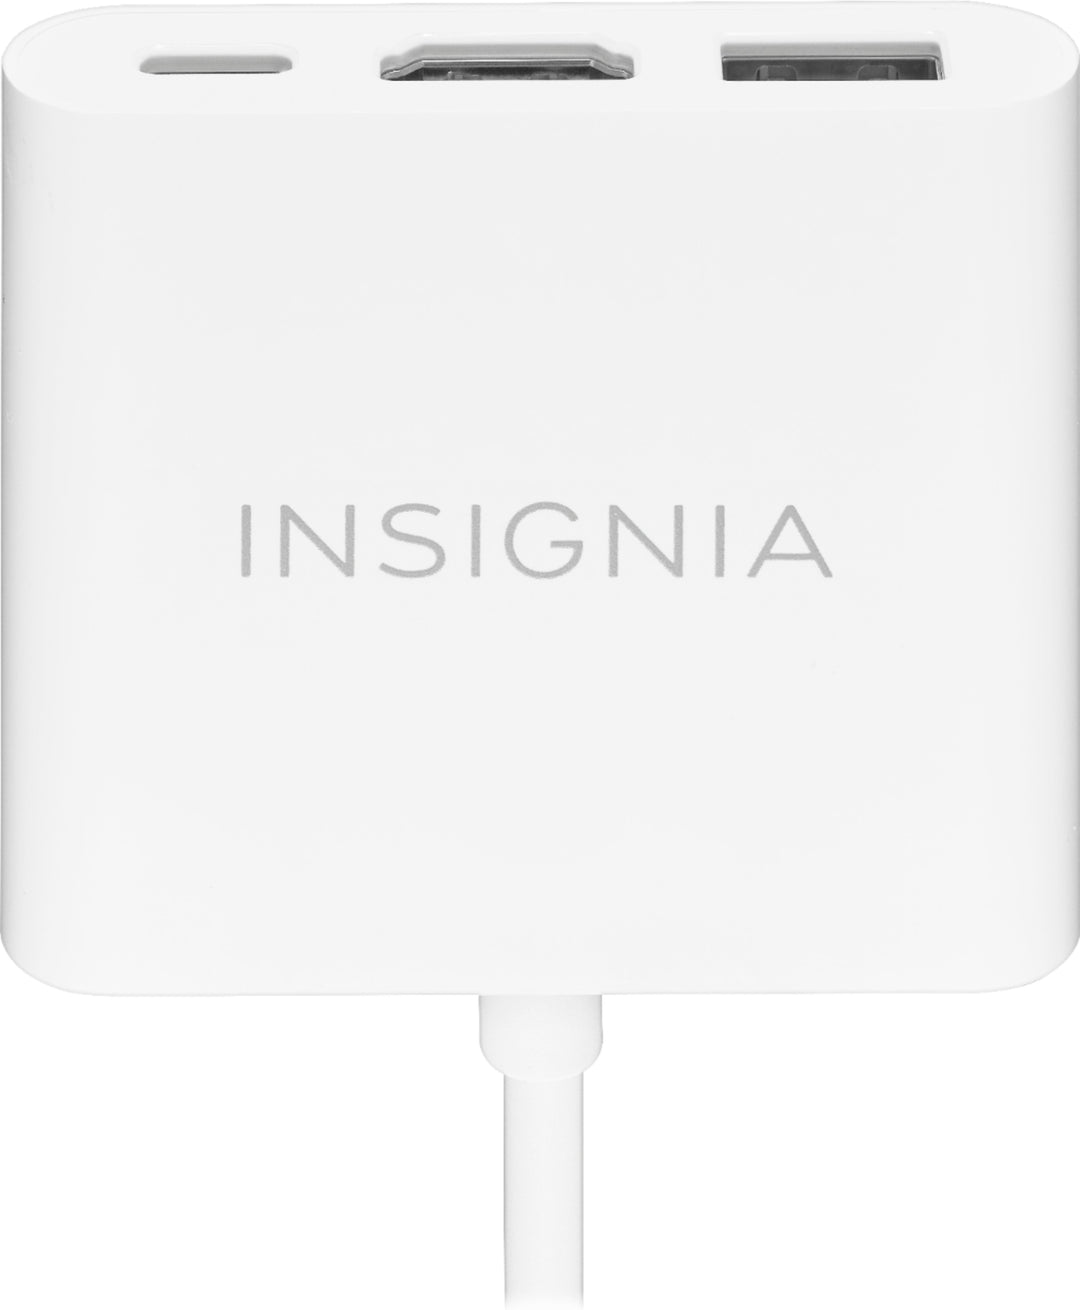 Insignia™ - USB-C to HDMI Multiport Adapter - White_3